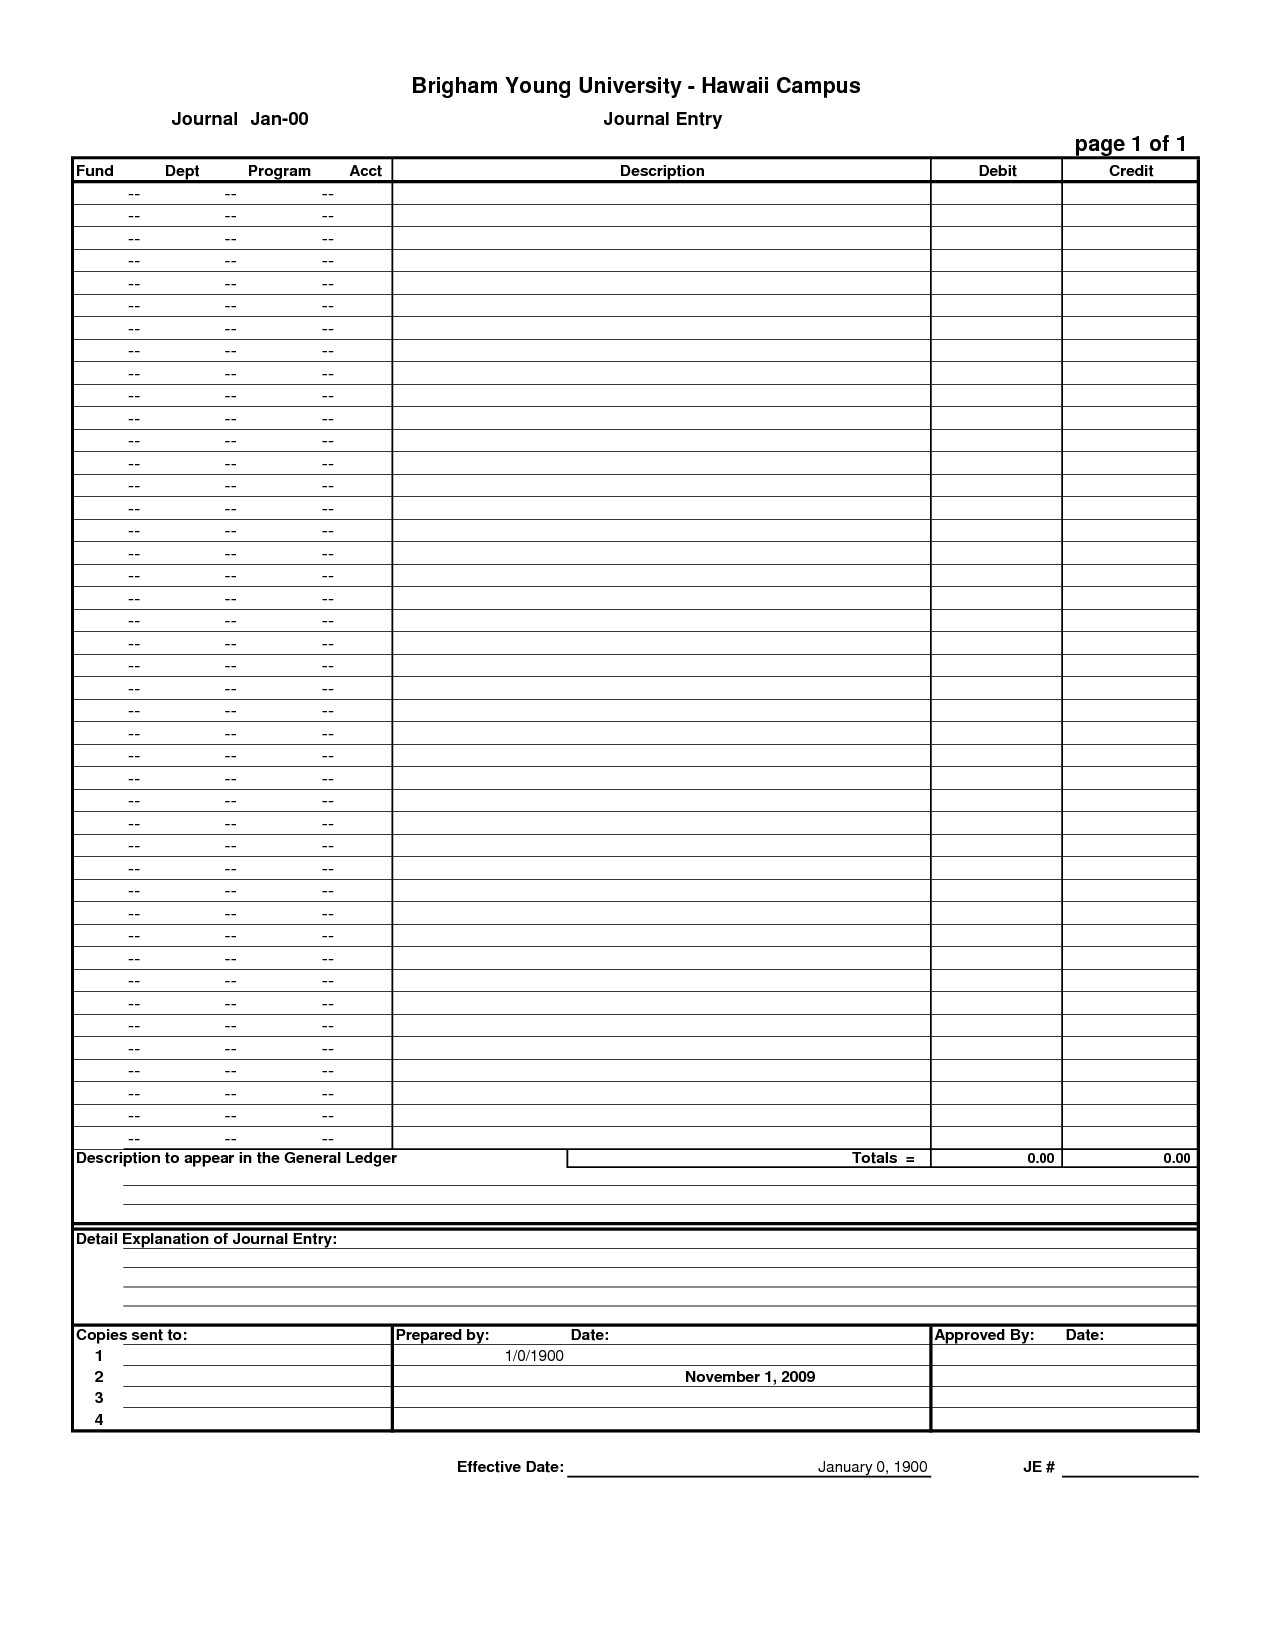 Accounting Journal Entry Template Best S Of Journal Entry Template Excel Blank